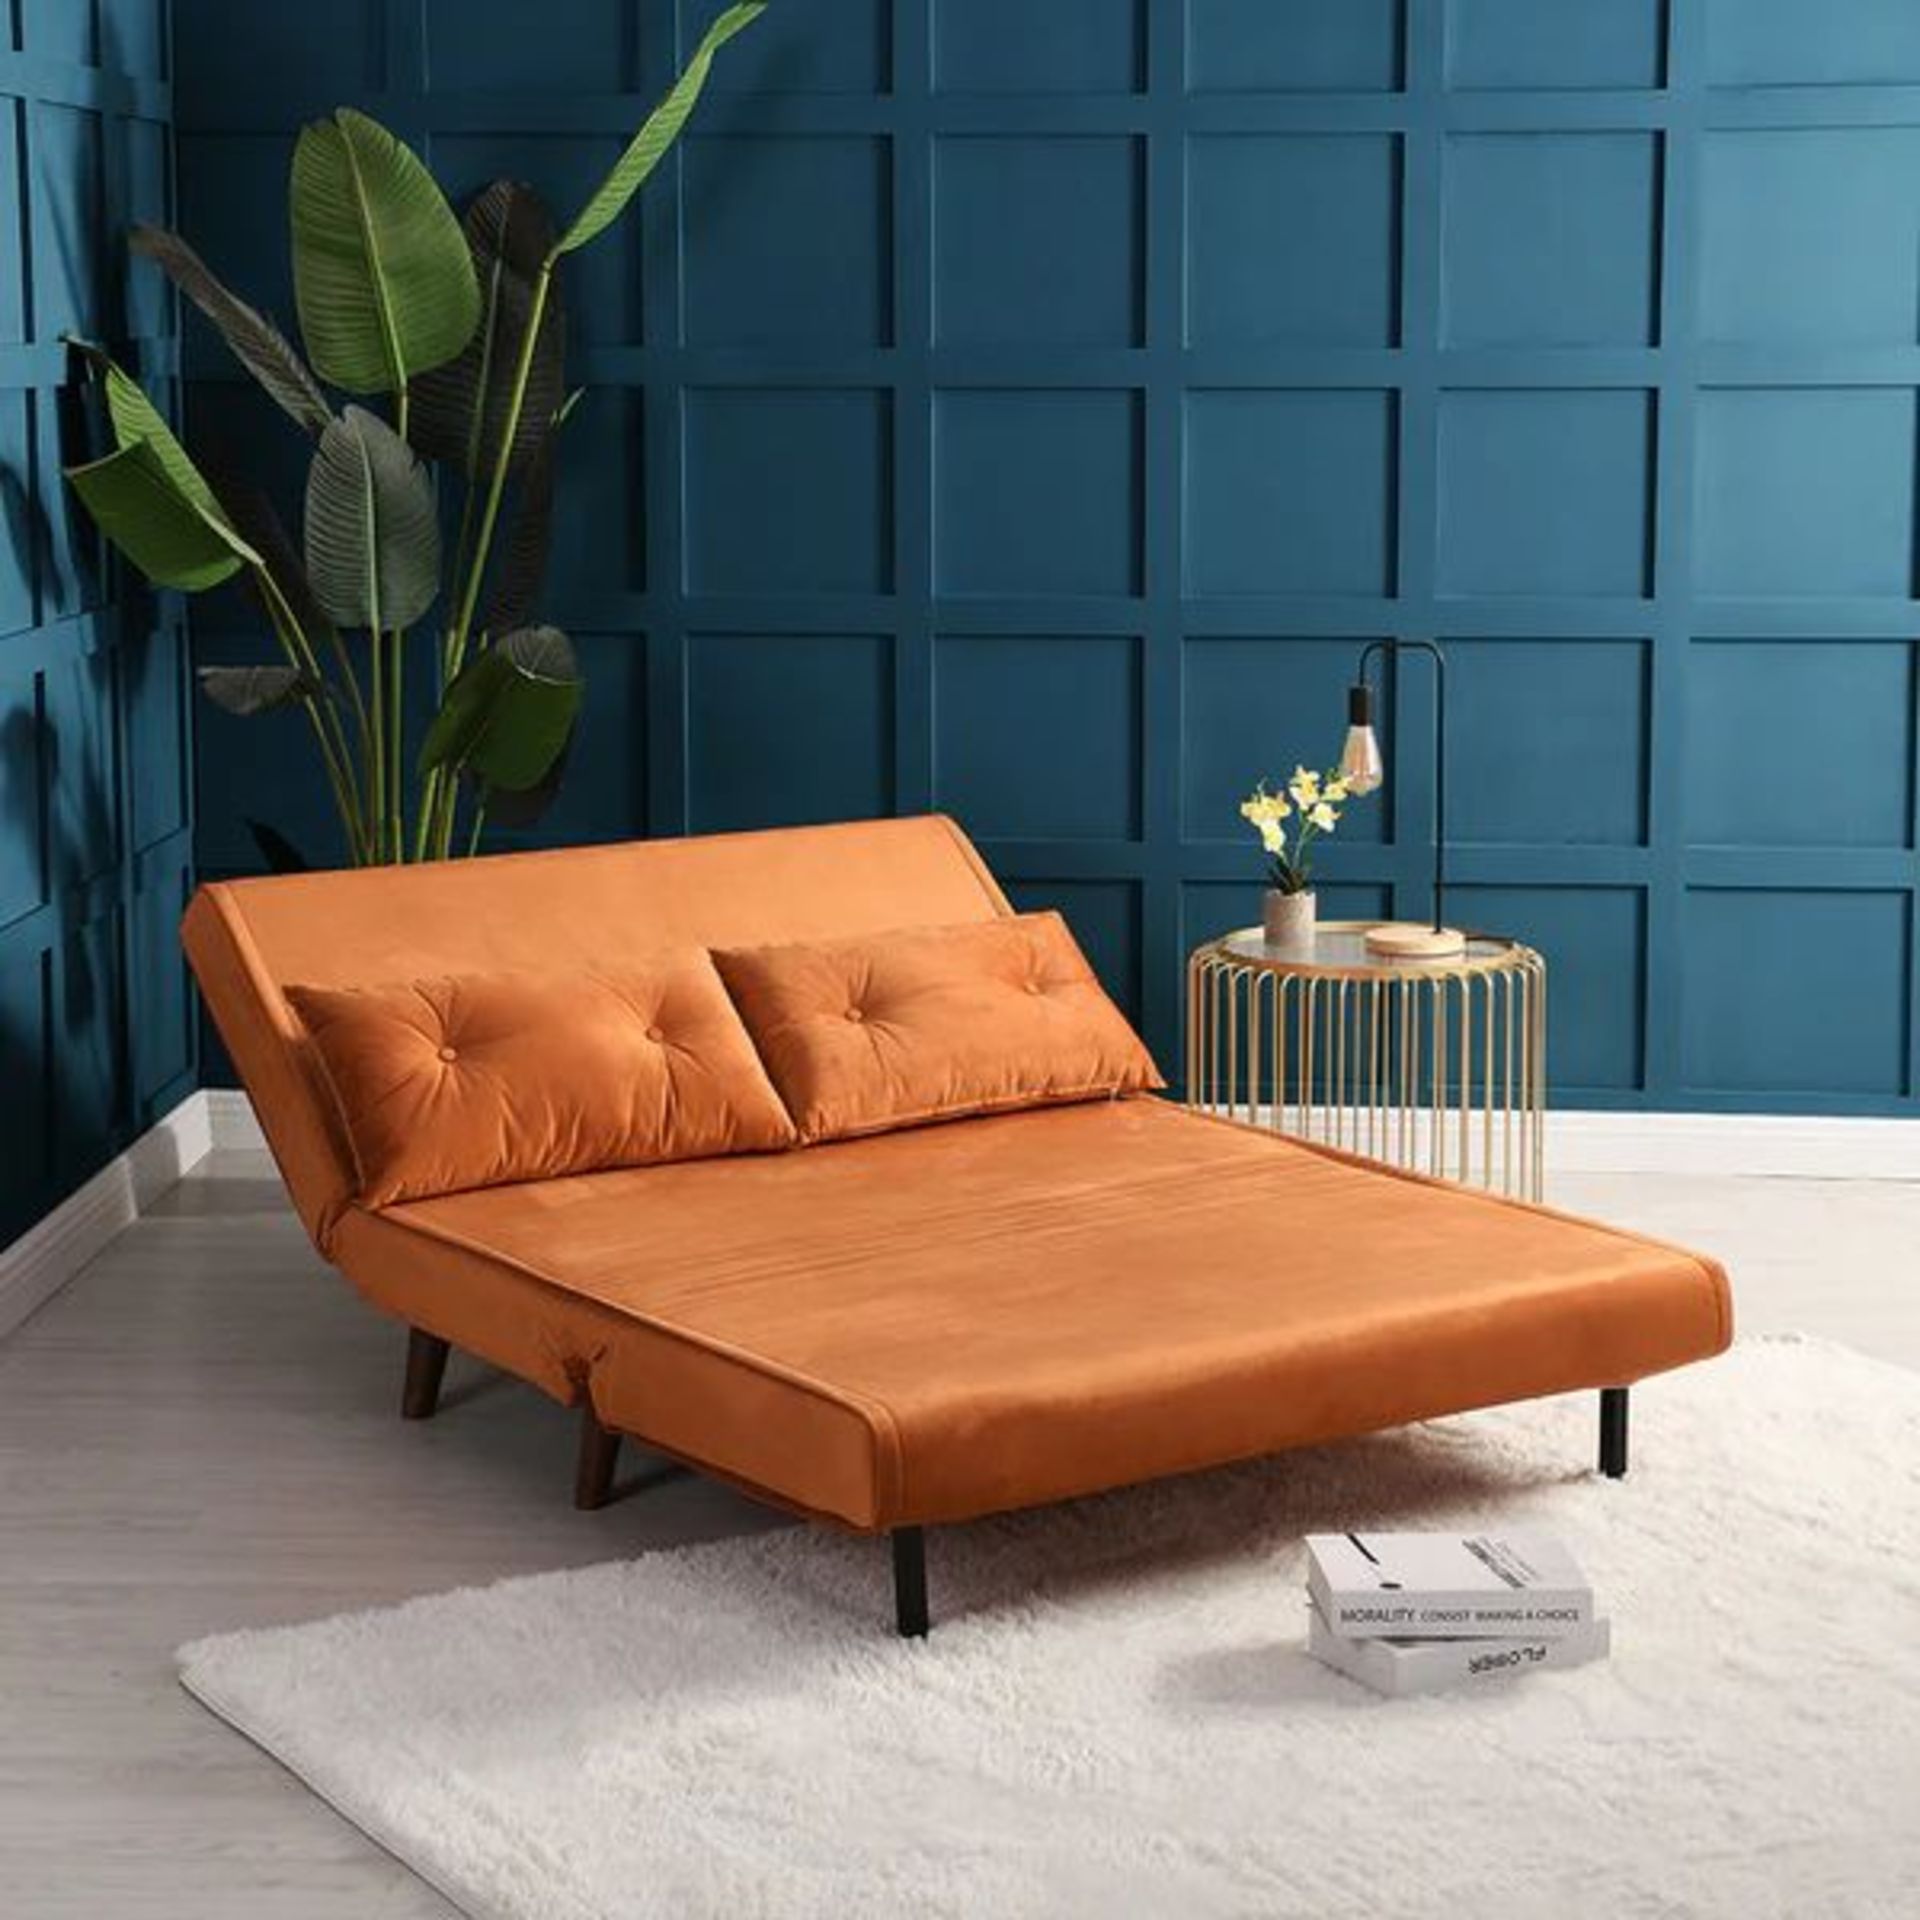 Algo Sofabed with Cushions in Orange Velvet 2 Seater. - R14. RRP £479.99. Upholstered with beautiful - Image 2 of 2